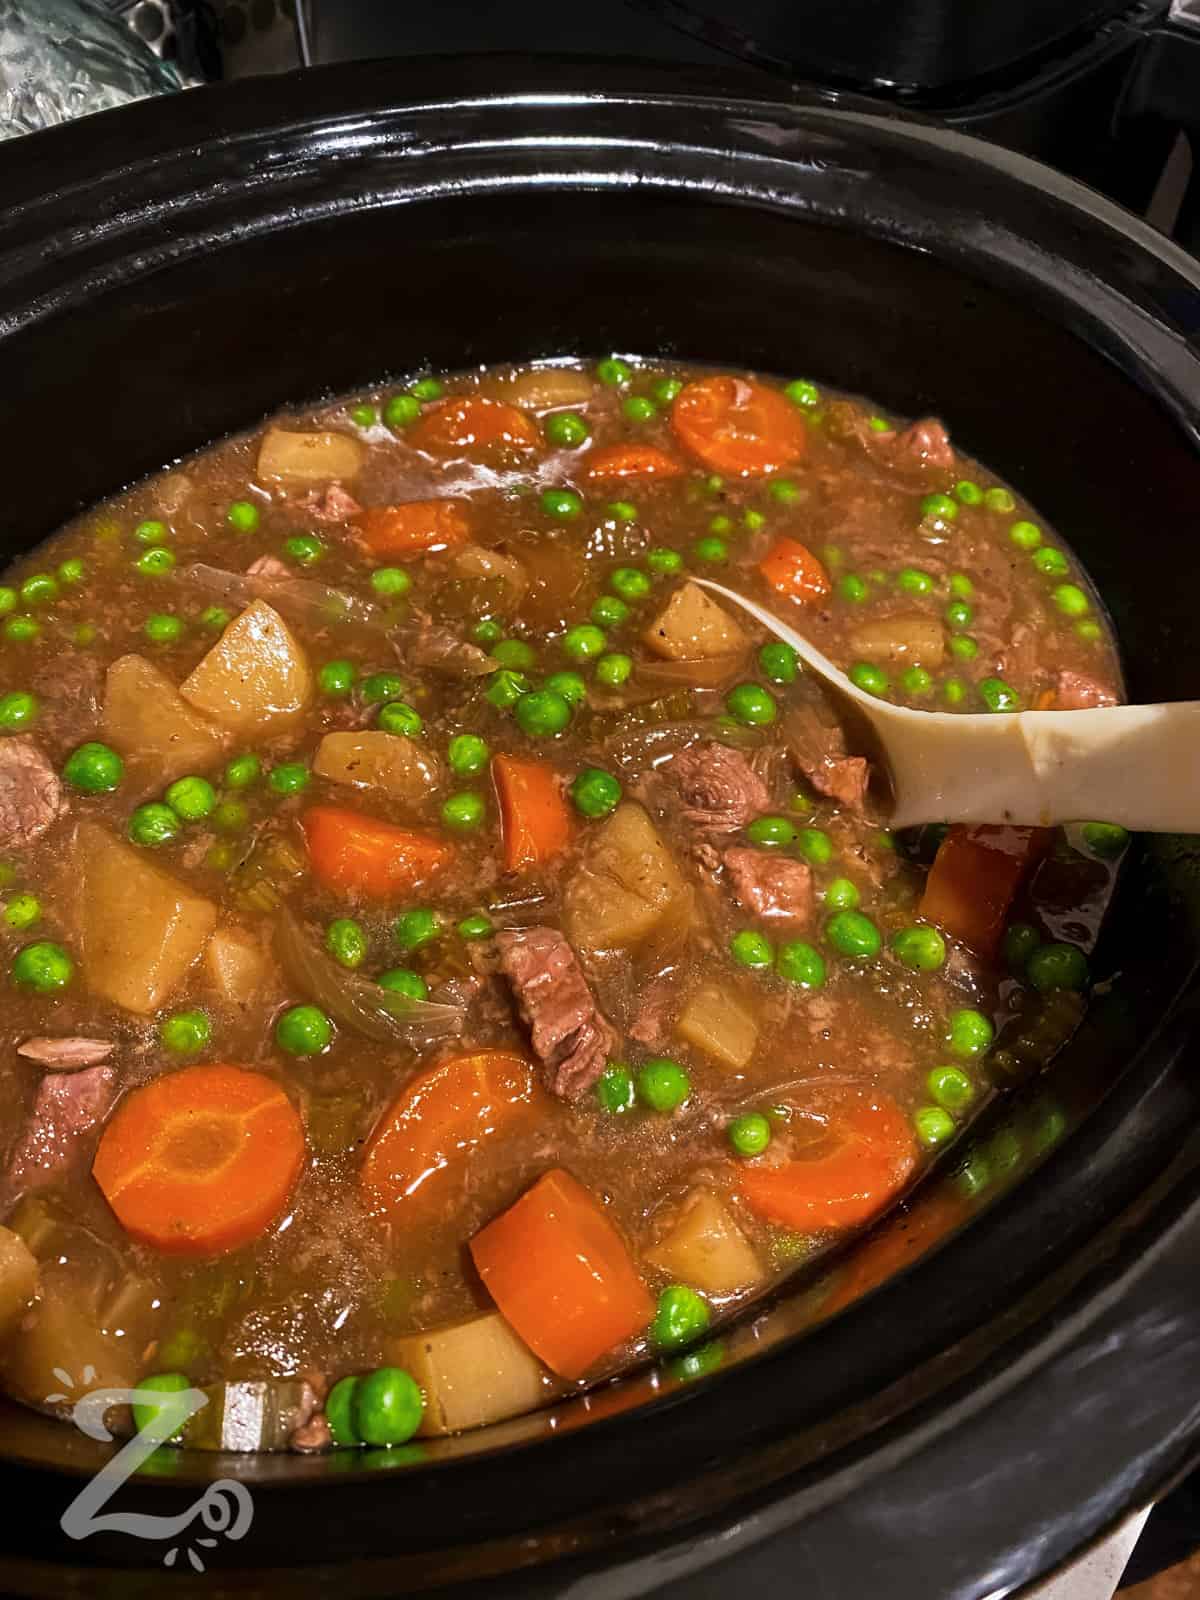 A slow cooker of beef stew